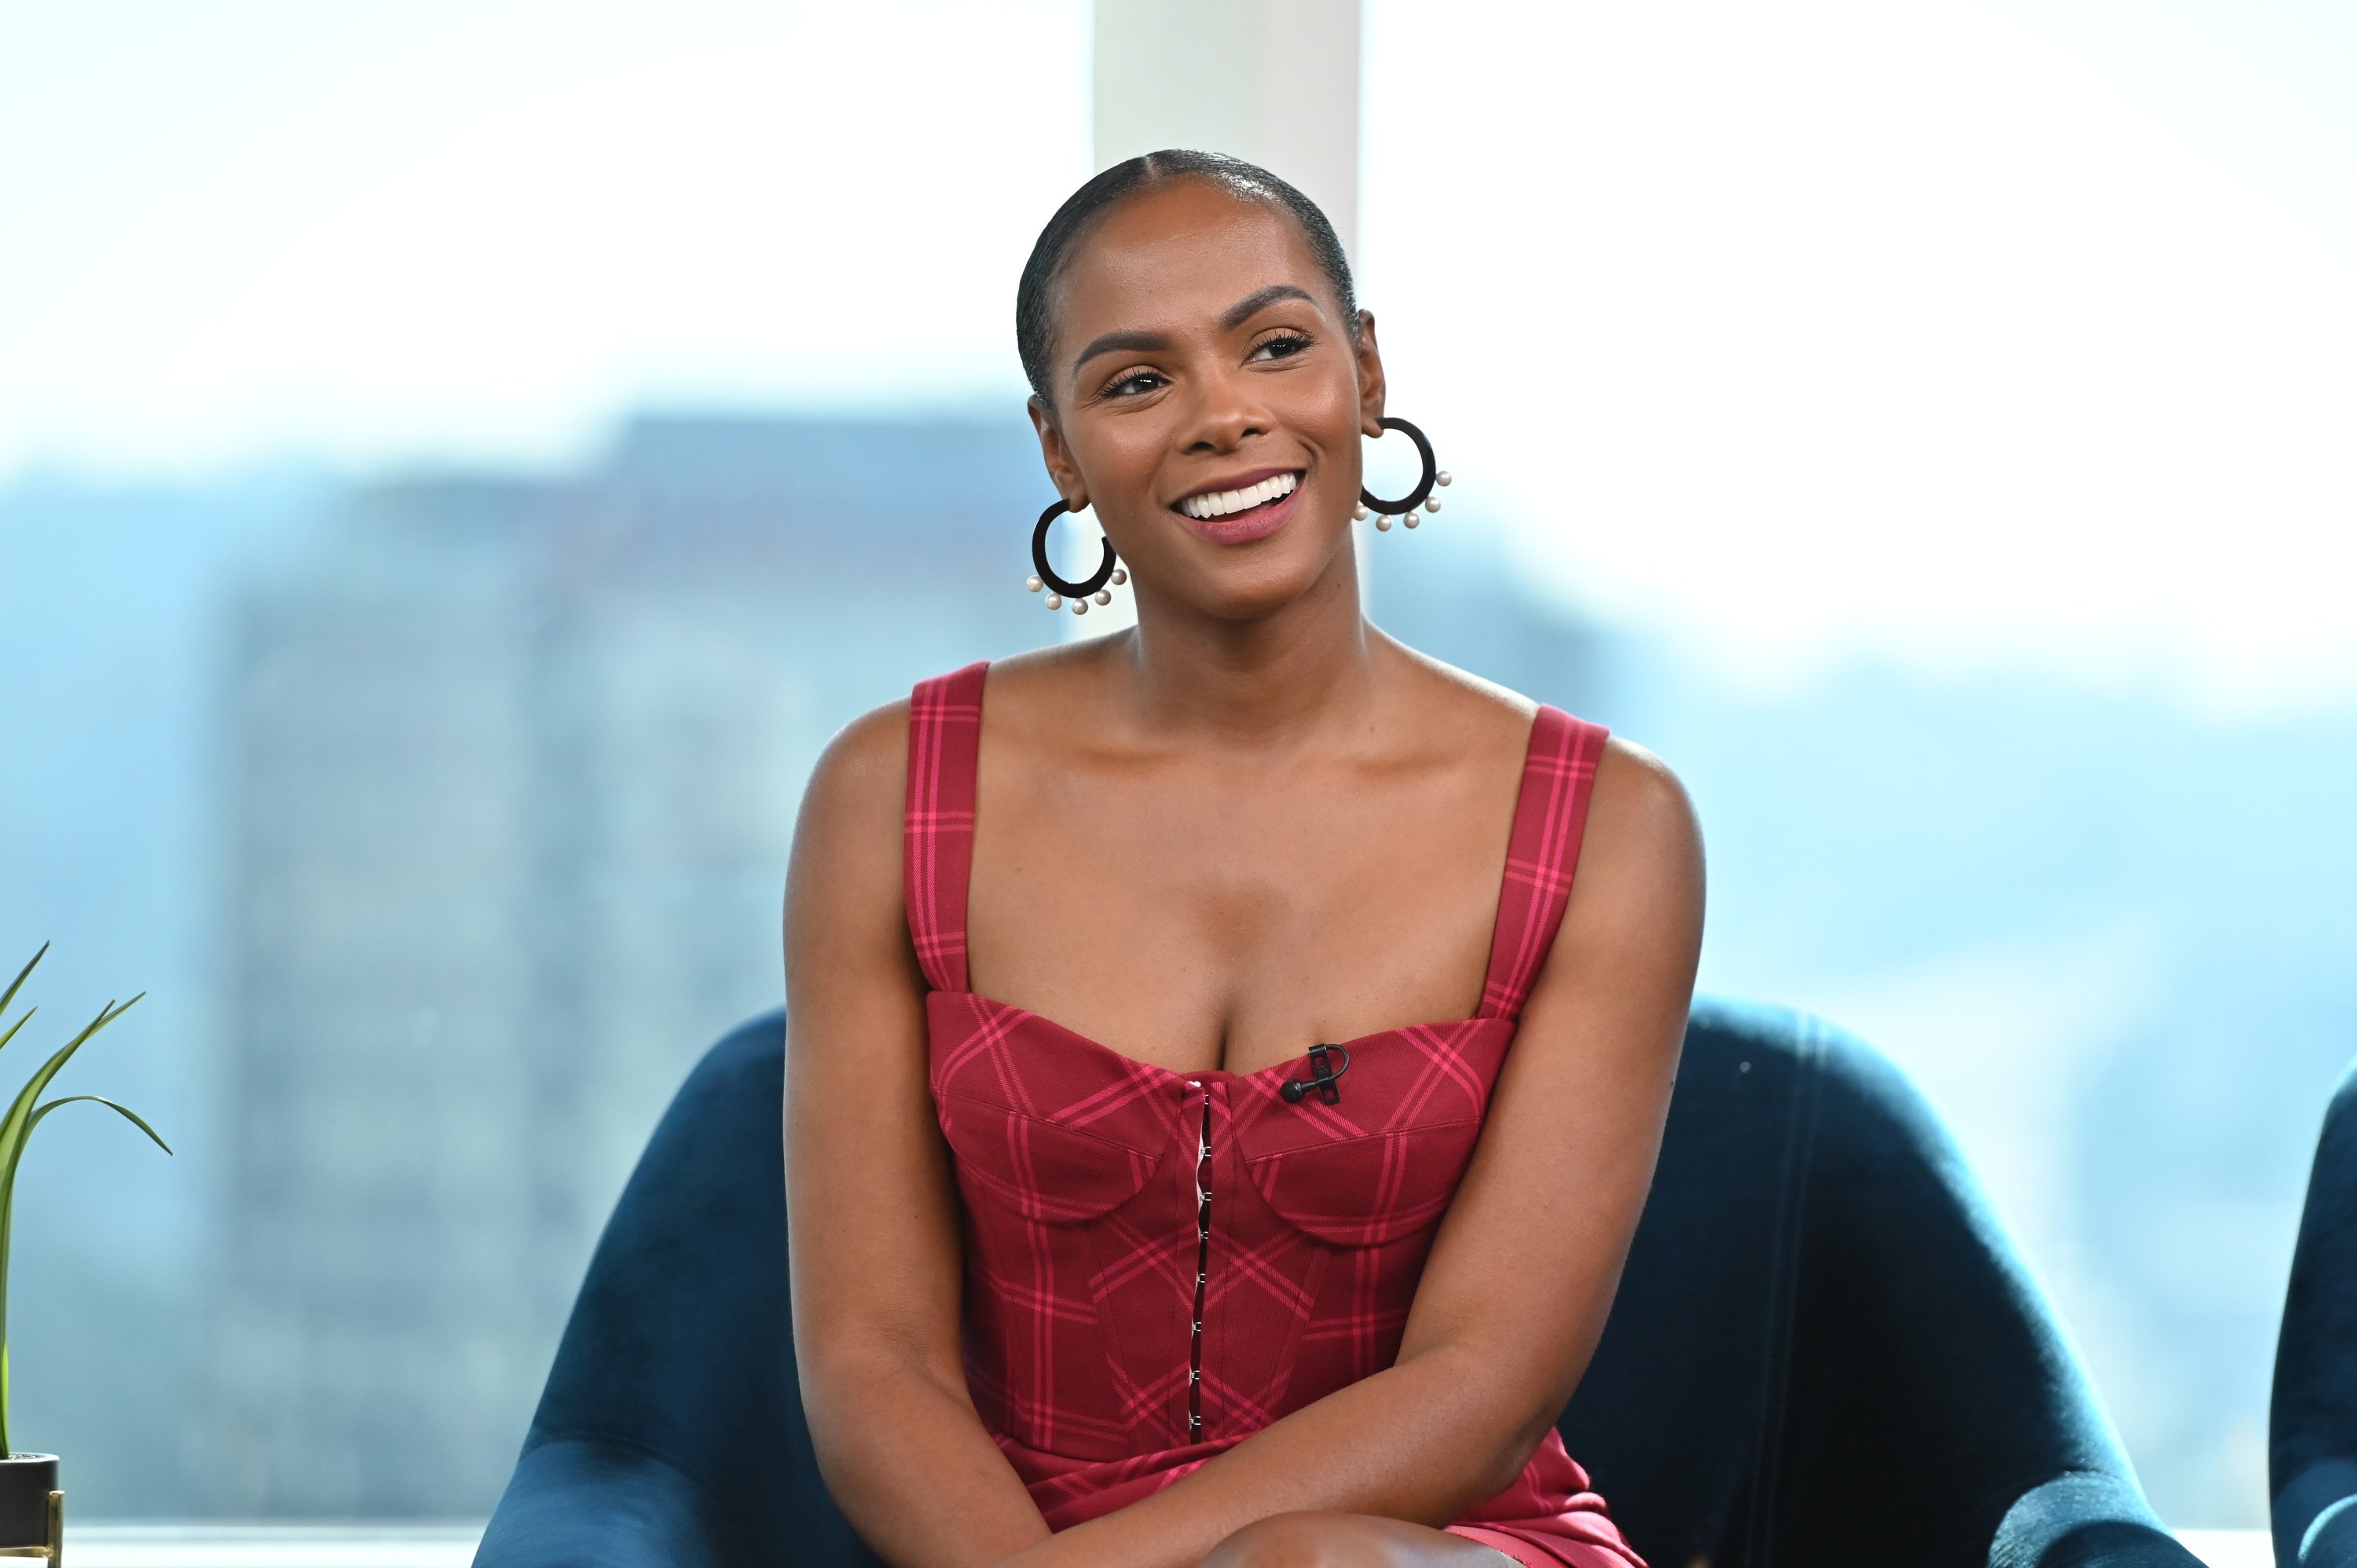 Tika Sumpter on the set of E!’s Daily Pop to discuss her movie, “Sonic the Hedgehog”, 2020. |Source: Getty Images